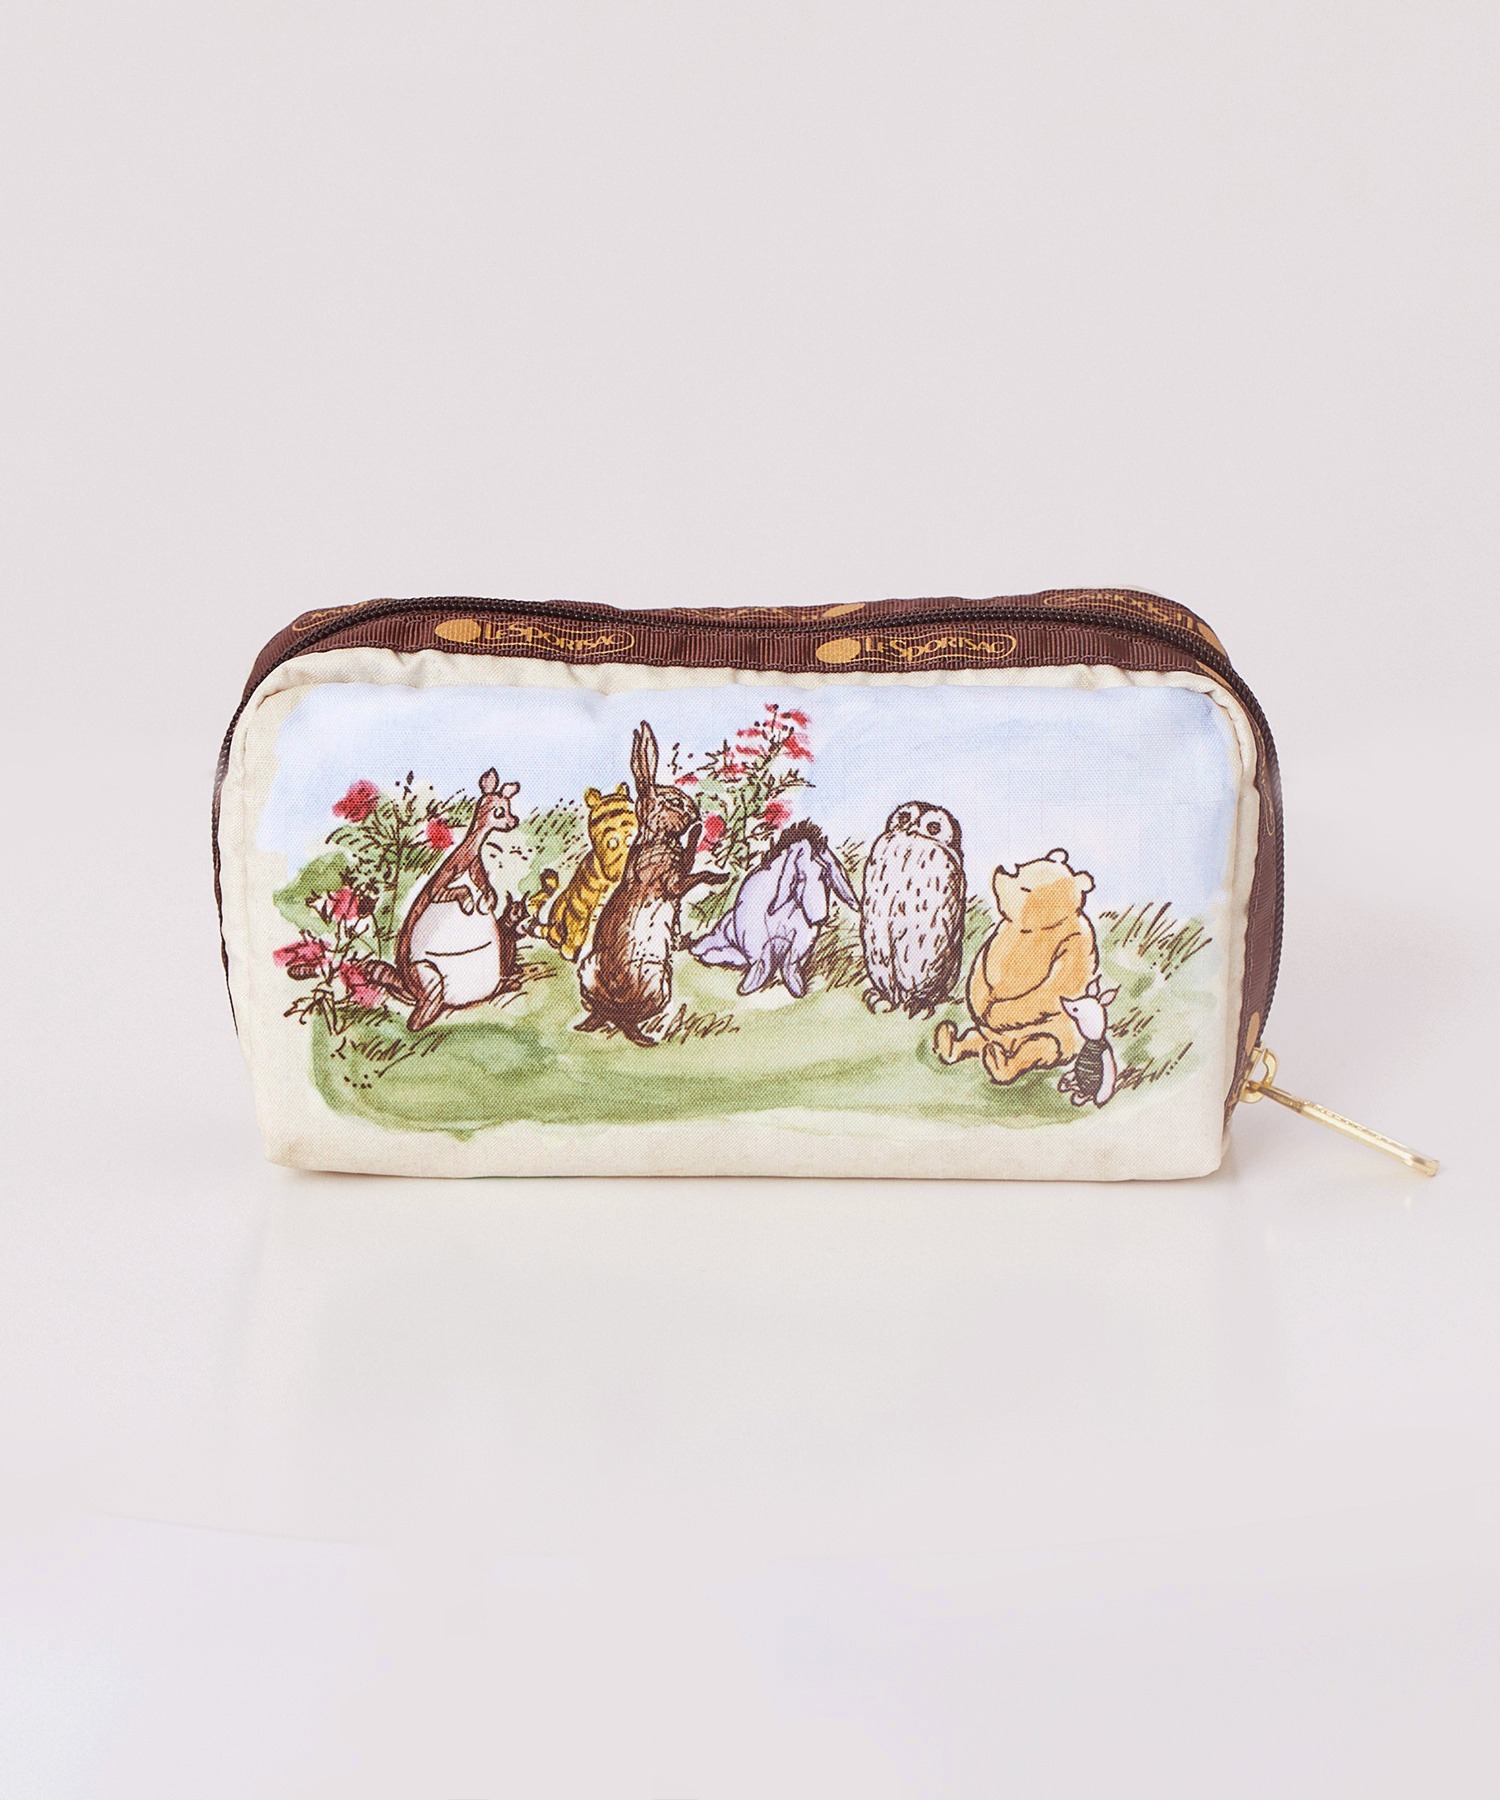 Lesportsac Disney Classic Pooh Collection Rectangular Cosmetic クラシックプー フレンズ Gaza Cch Ps